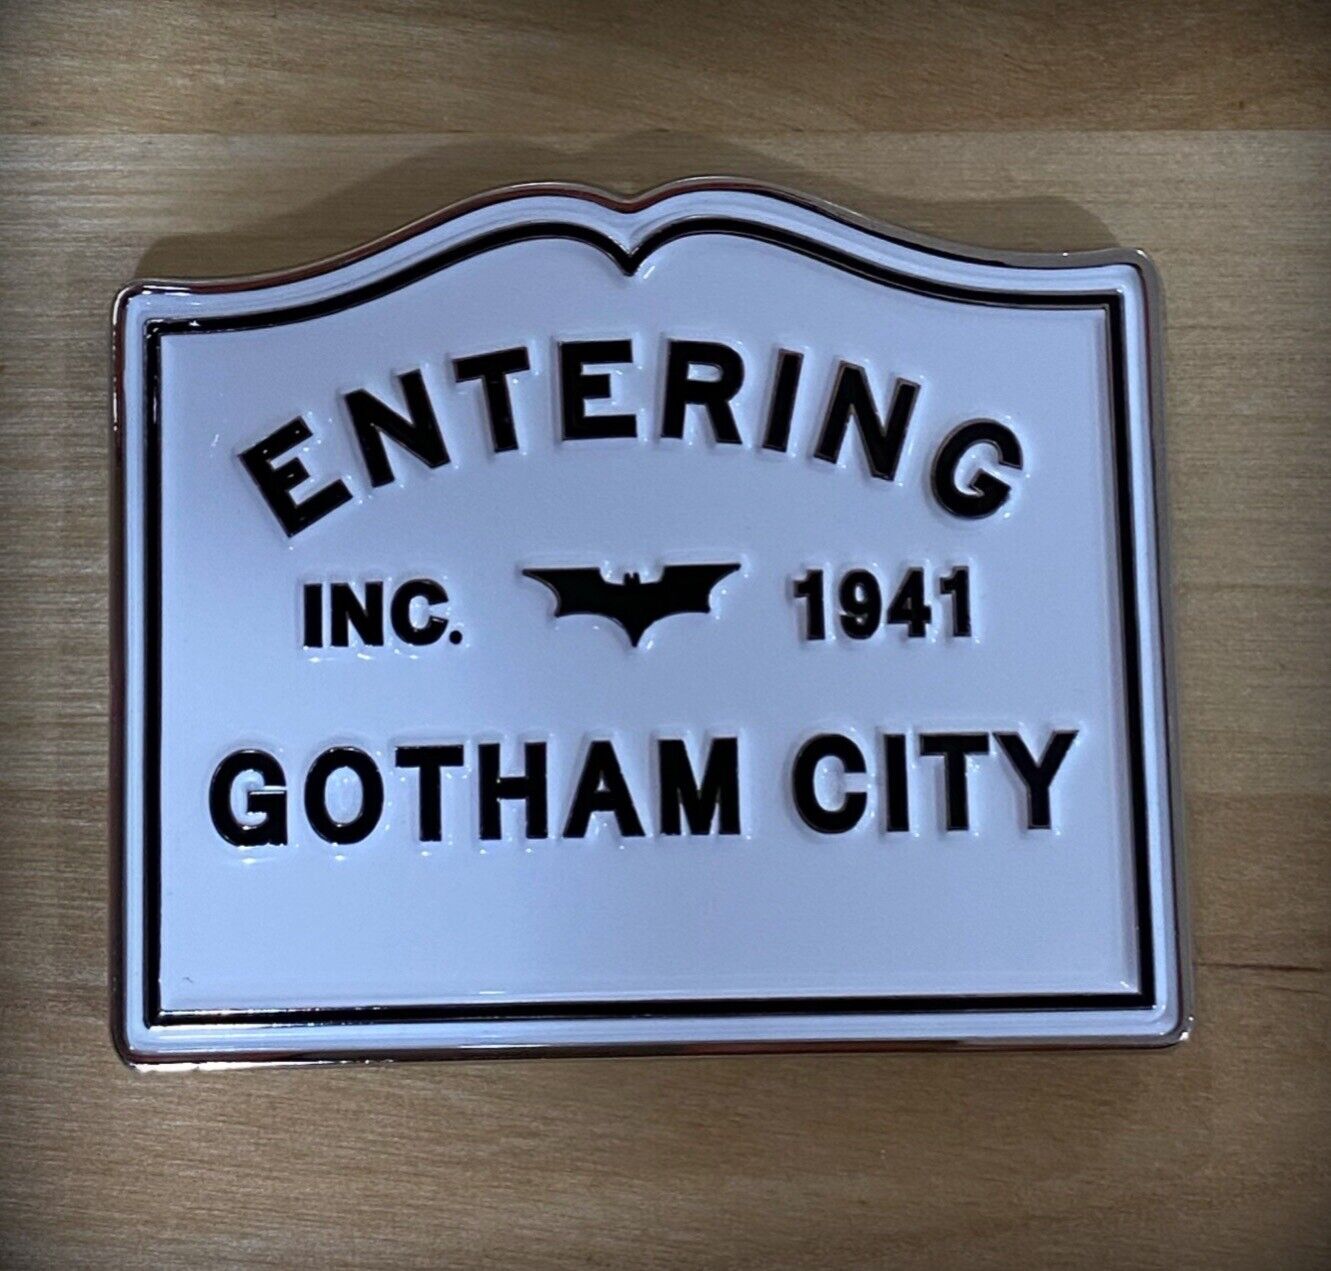 New Limited Entering Gotham City Coin